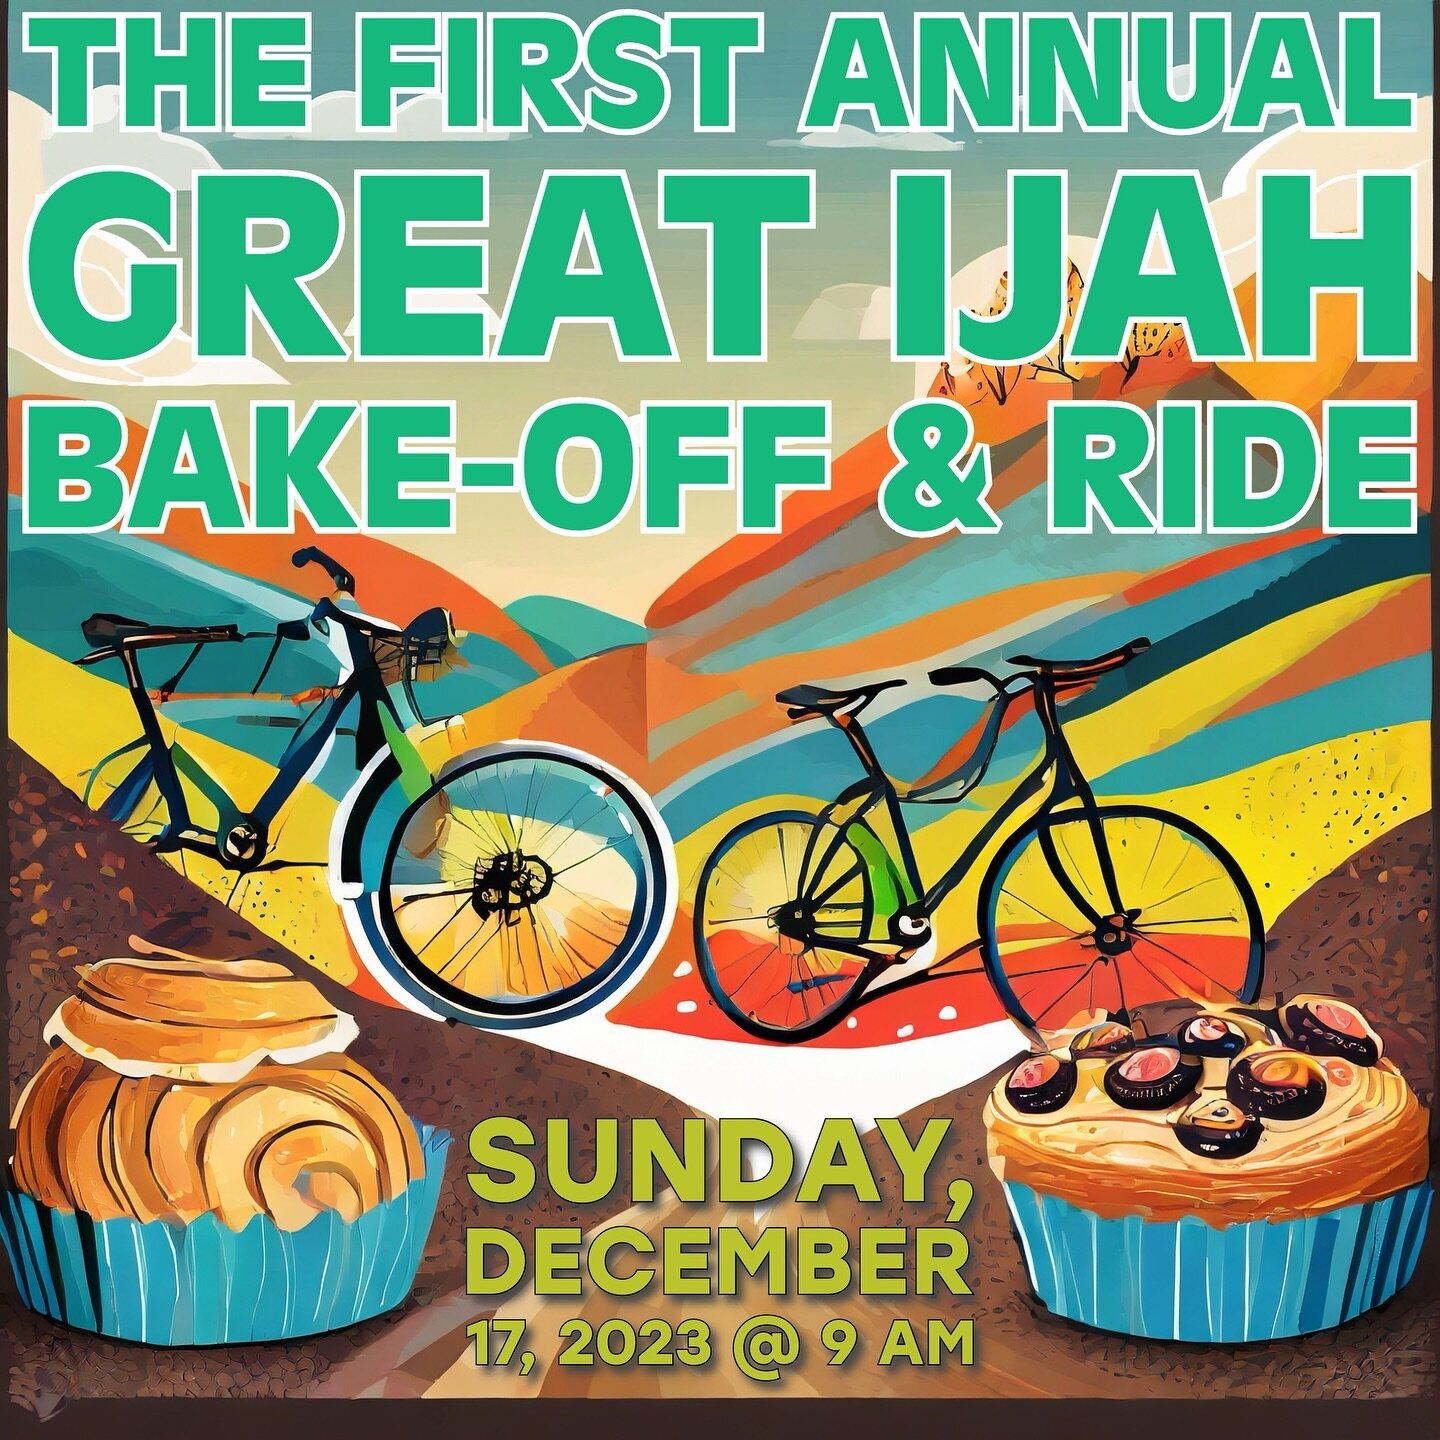 We are pumped for this ride and event! Come join us for a scenic loop and then stay to taste-test and judge some baked goods! Bring your own treat and be entered to win! Full details with route available on our Strava club page. #itsjustahill